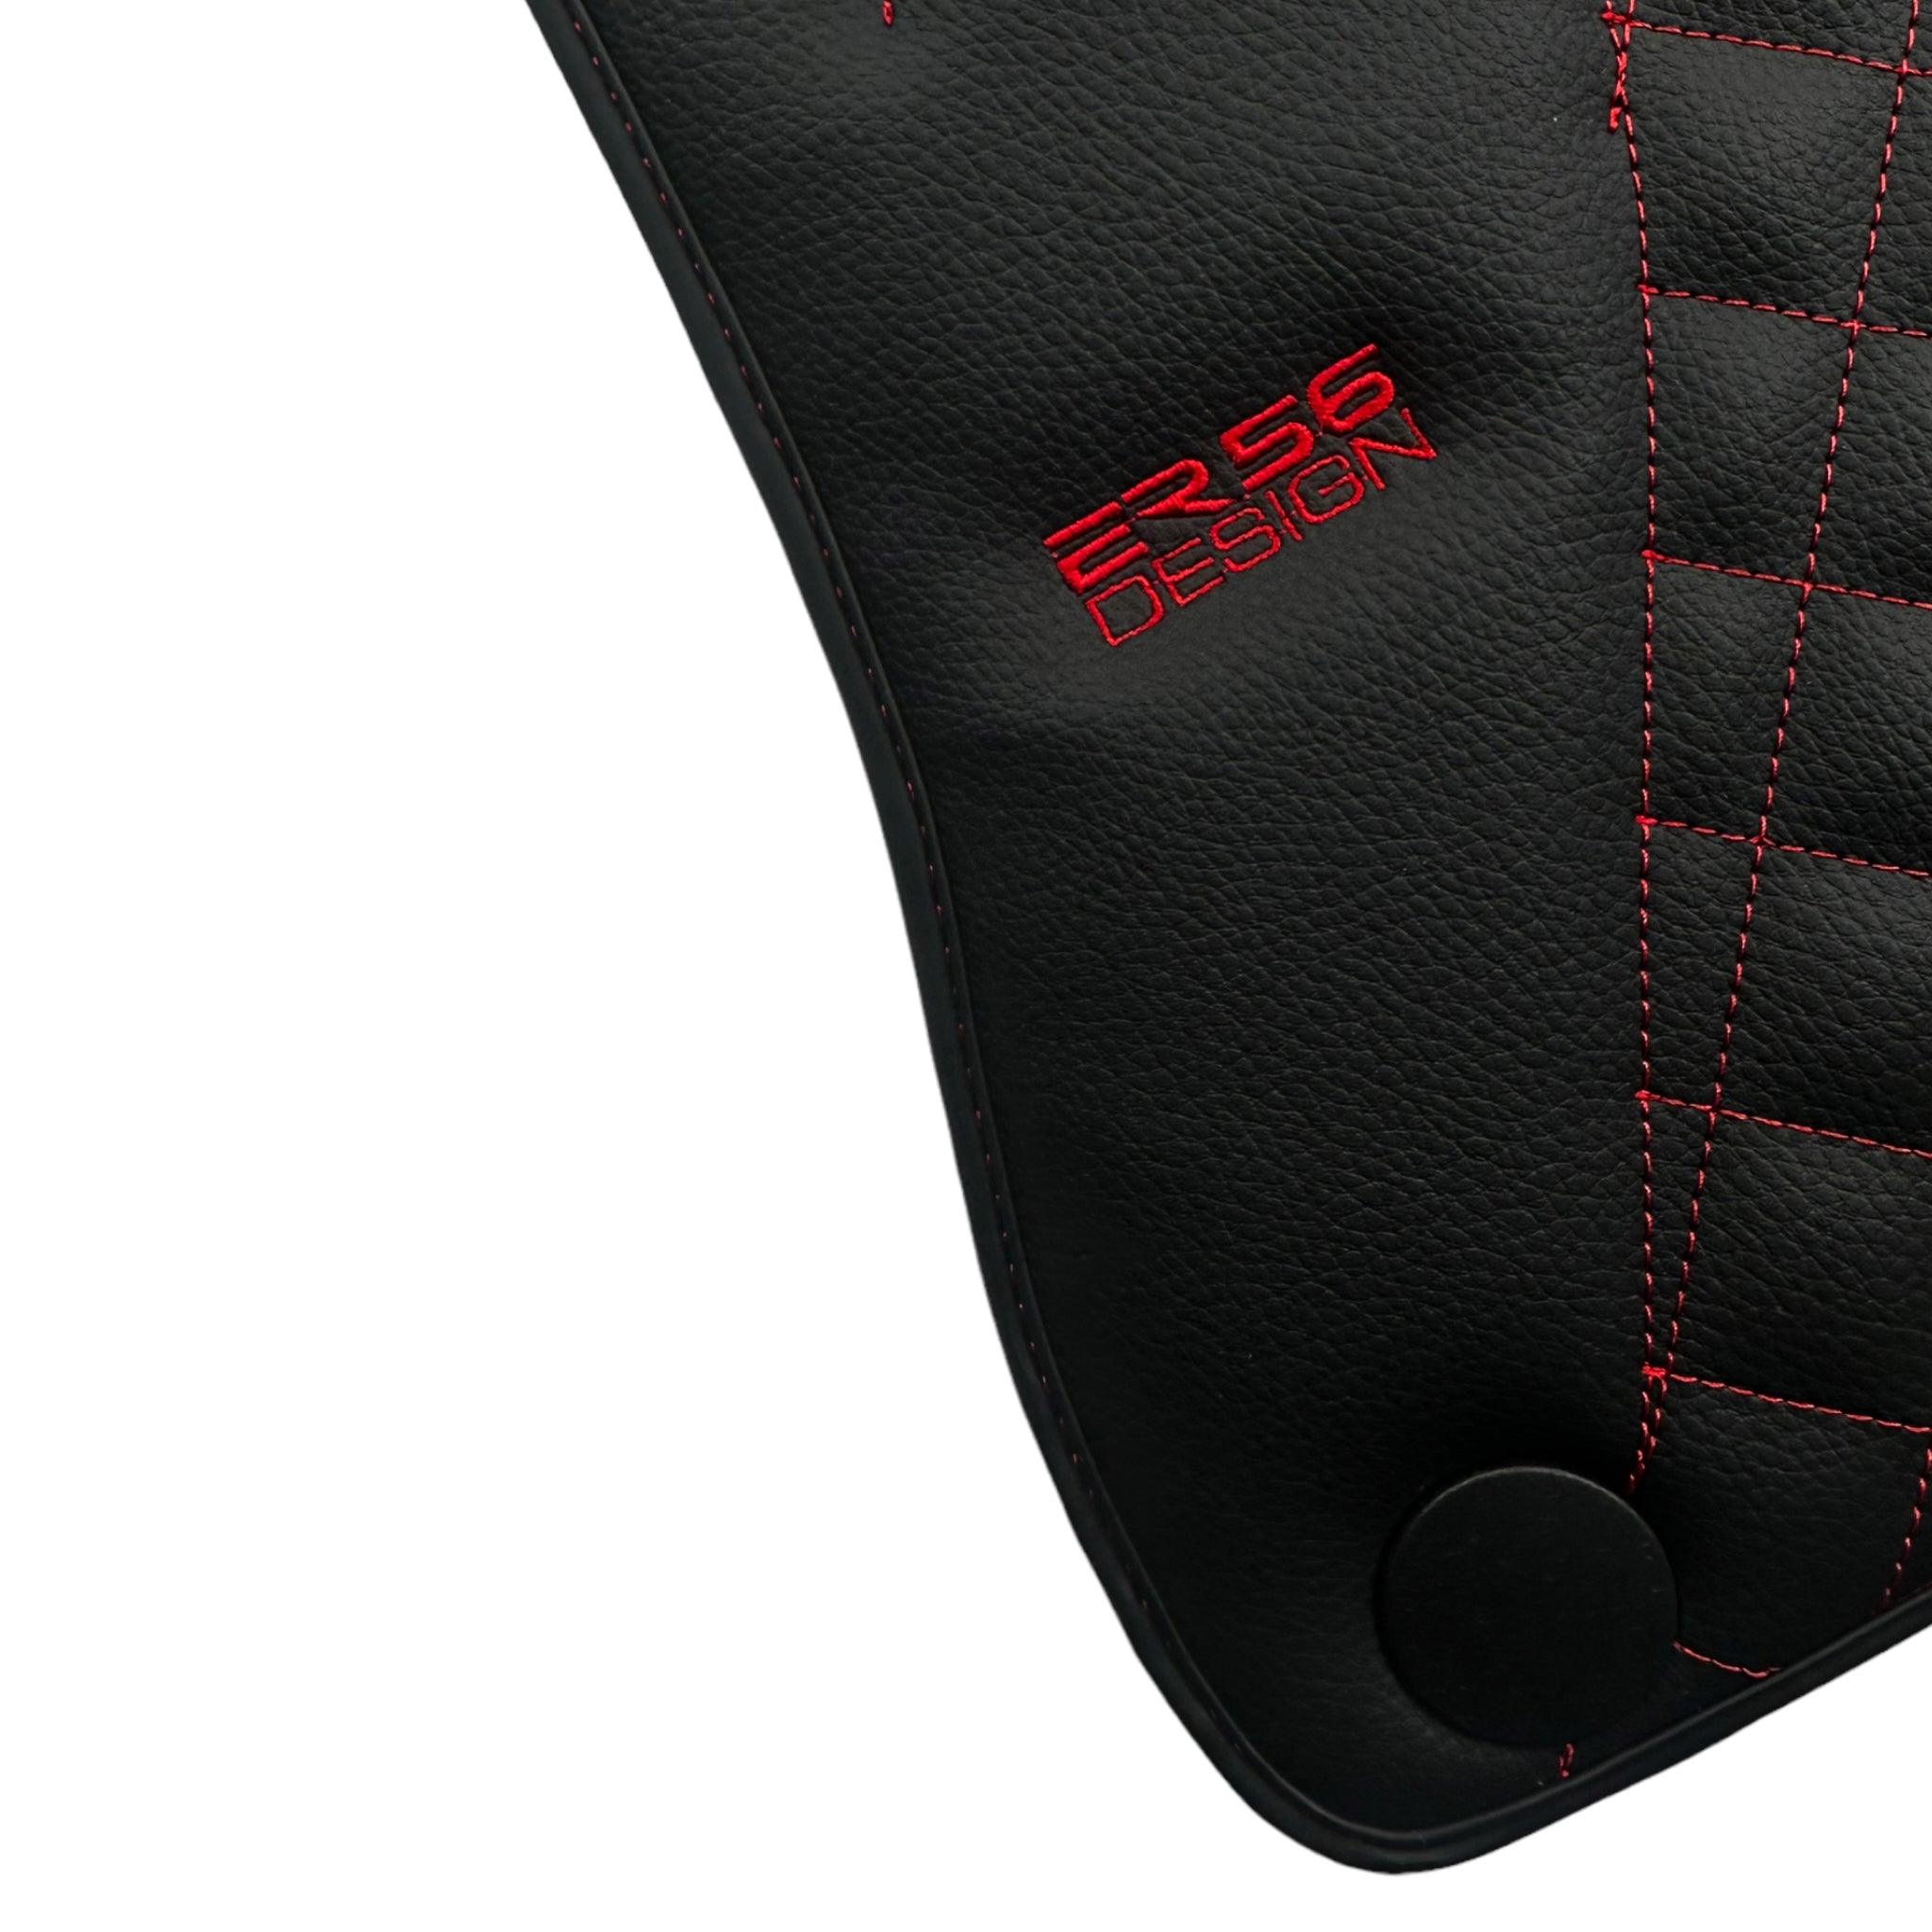 Black Leather Floor Mats For Mercedes Benz E-Class C207 Coupe (2009-2013)